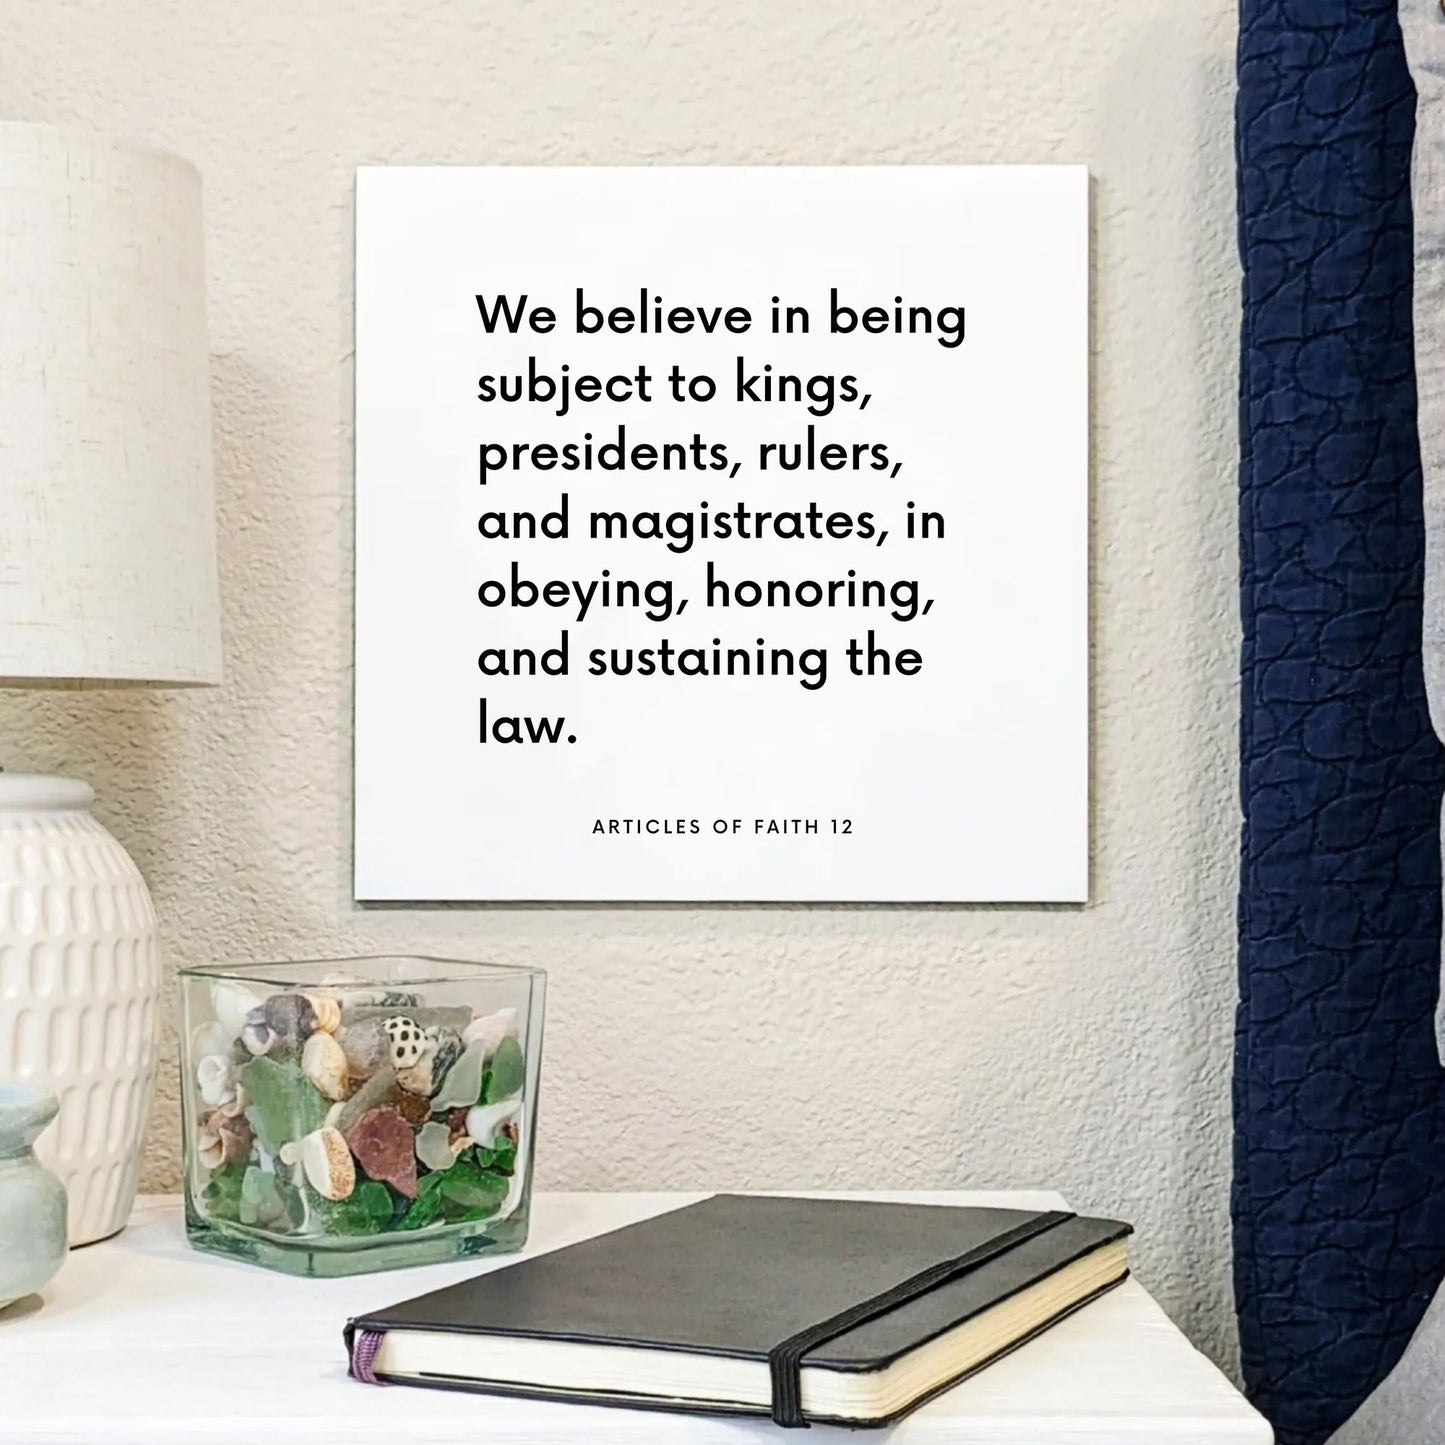 Bedside mouting of the scripture tile for Articles of Faith 12 - "We believe in being subject to kings, presidents, rulers"